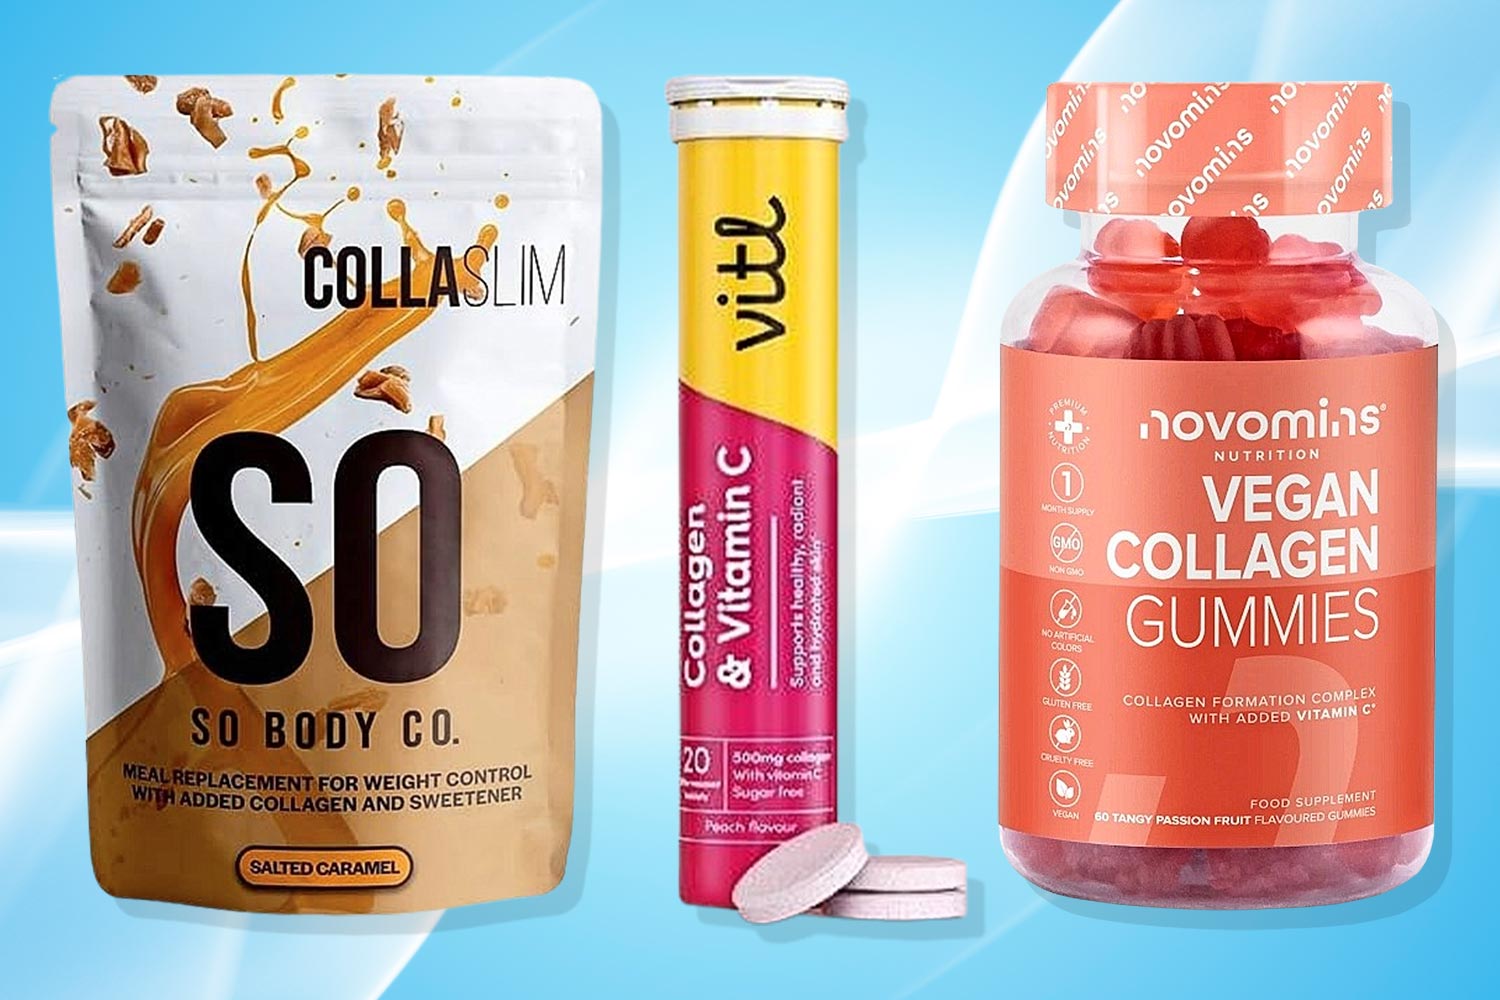 From tablets to gummies, we test easy ways to get more collagen to help skin and joints